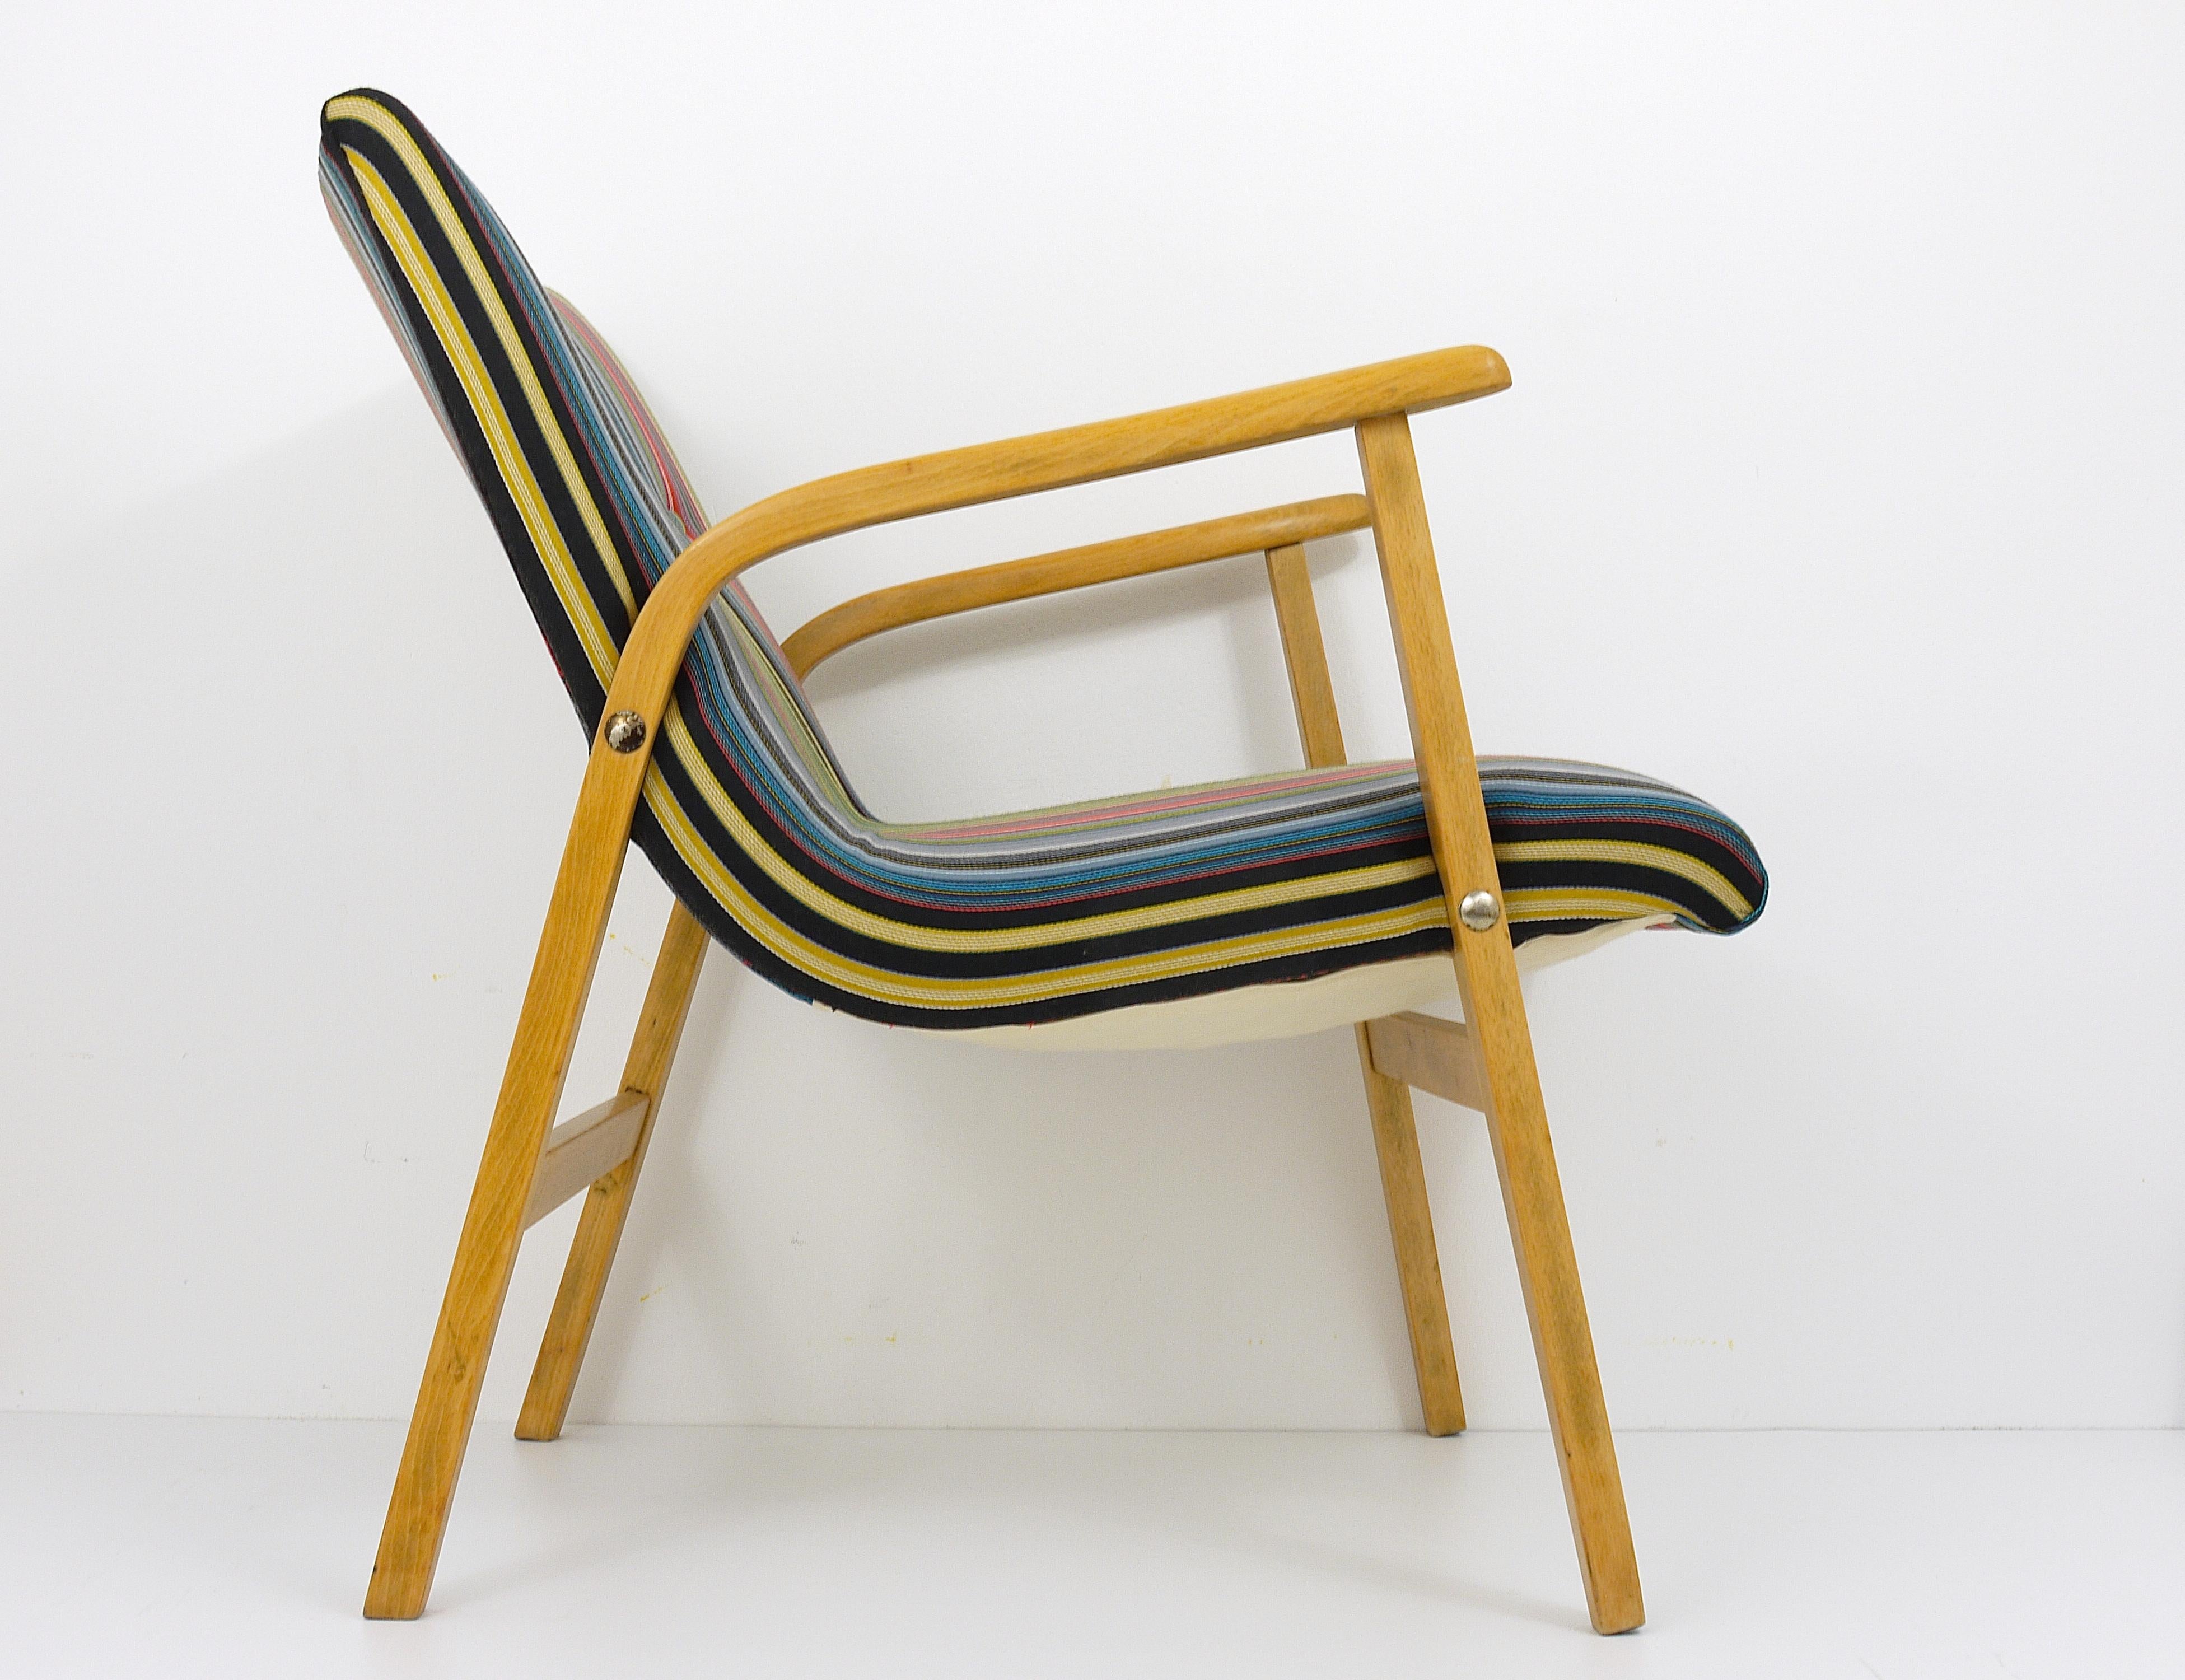 A beautiful midcentury armchair, designed by Roland Rainer in 1952 for the well known Café Ritter in Vienna . In excellent condition, gently restored and reupholstered with exclusive original Paul Smith fabric by Maharam NY. An eye-catching chair.